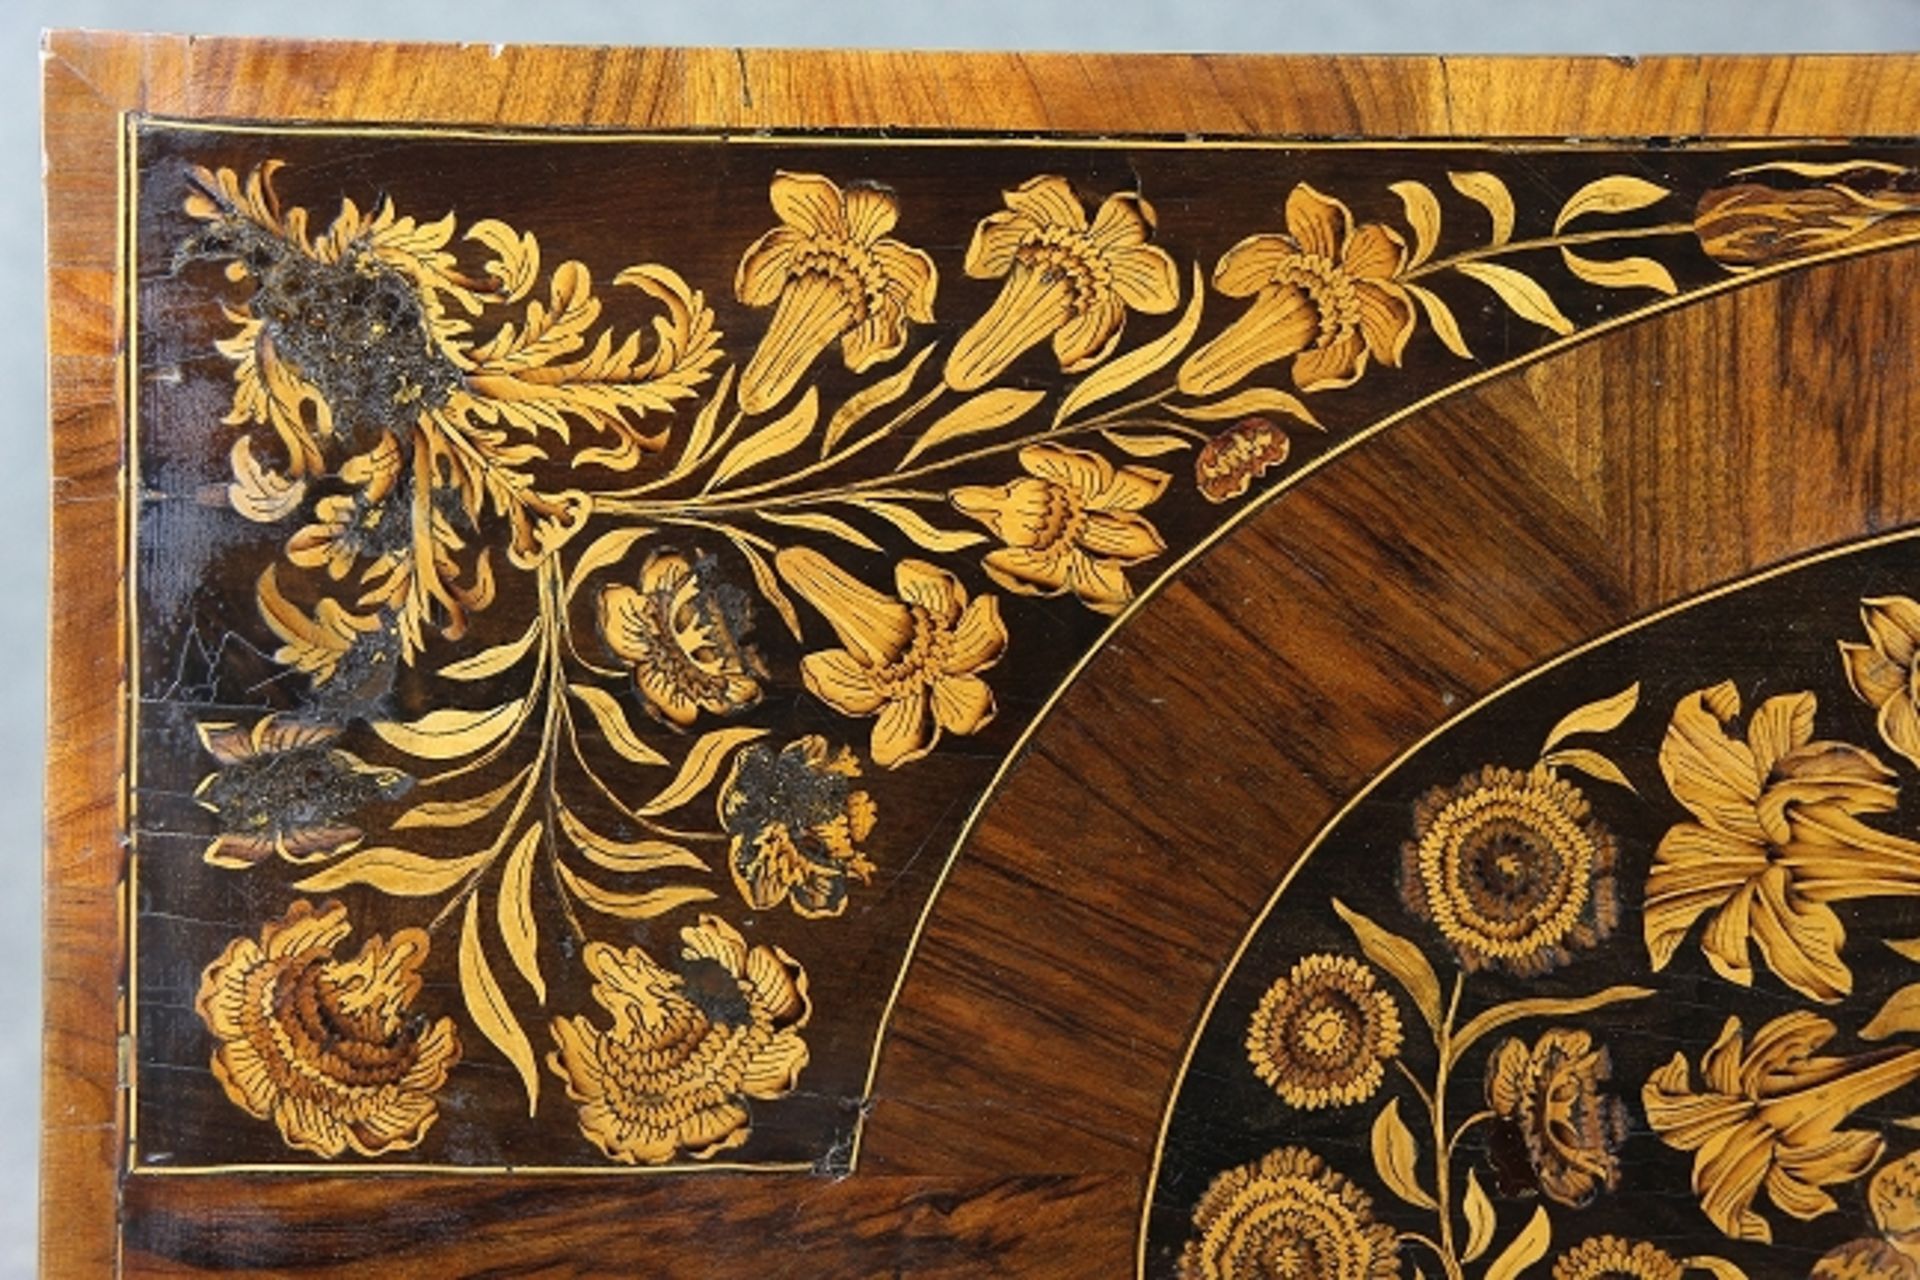 William & Mary - Chest of Drawers - Image 5 of 15